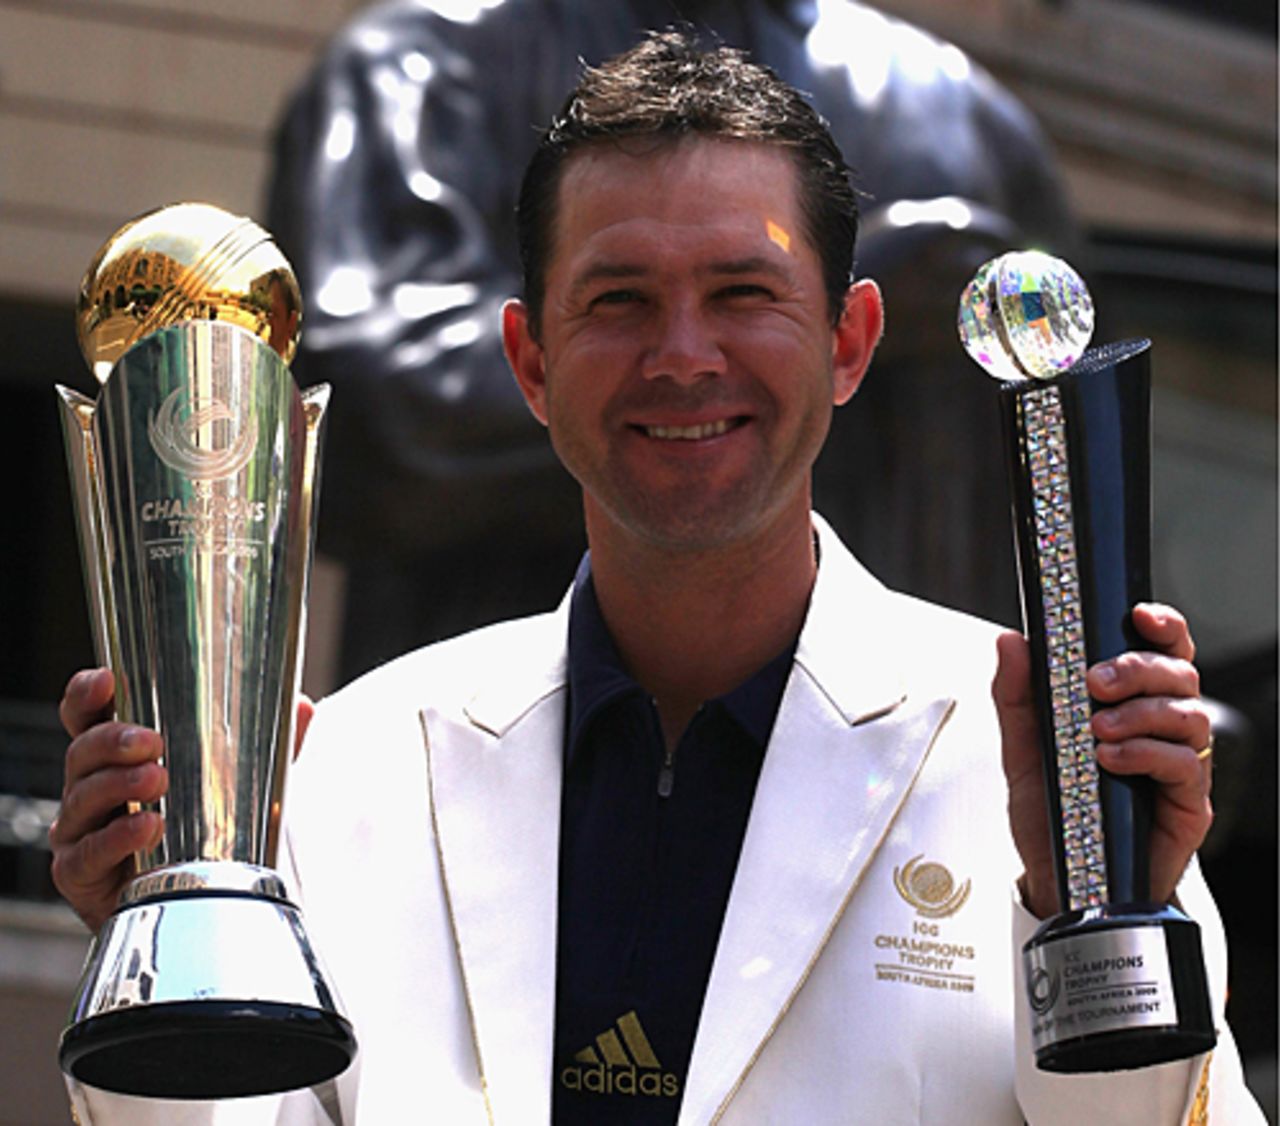 A rich haul from the Champions Trophy for Ricky Ponting, Johannesburg, October 6, 2009